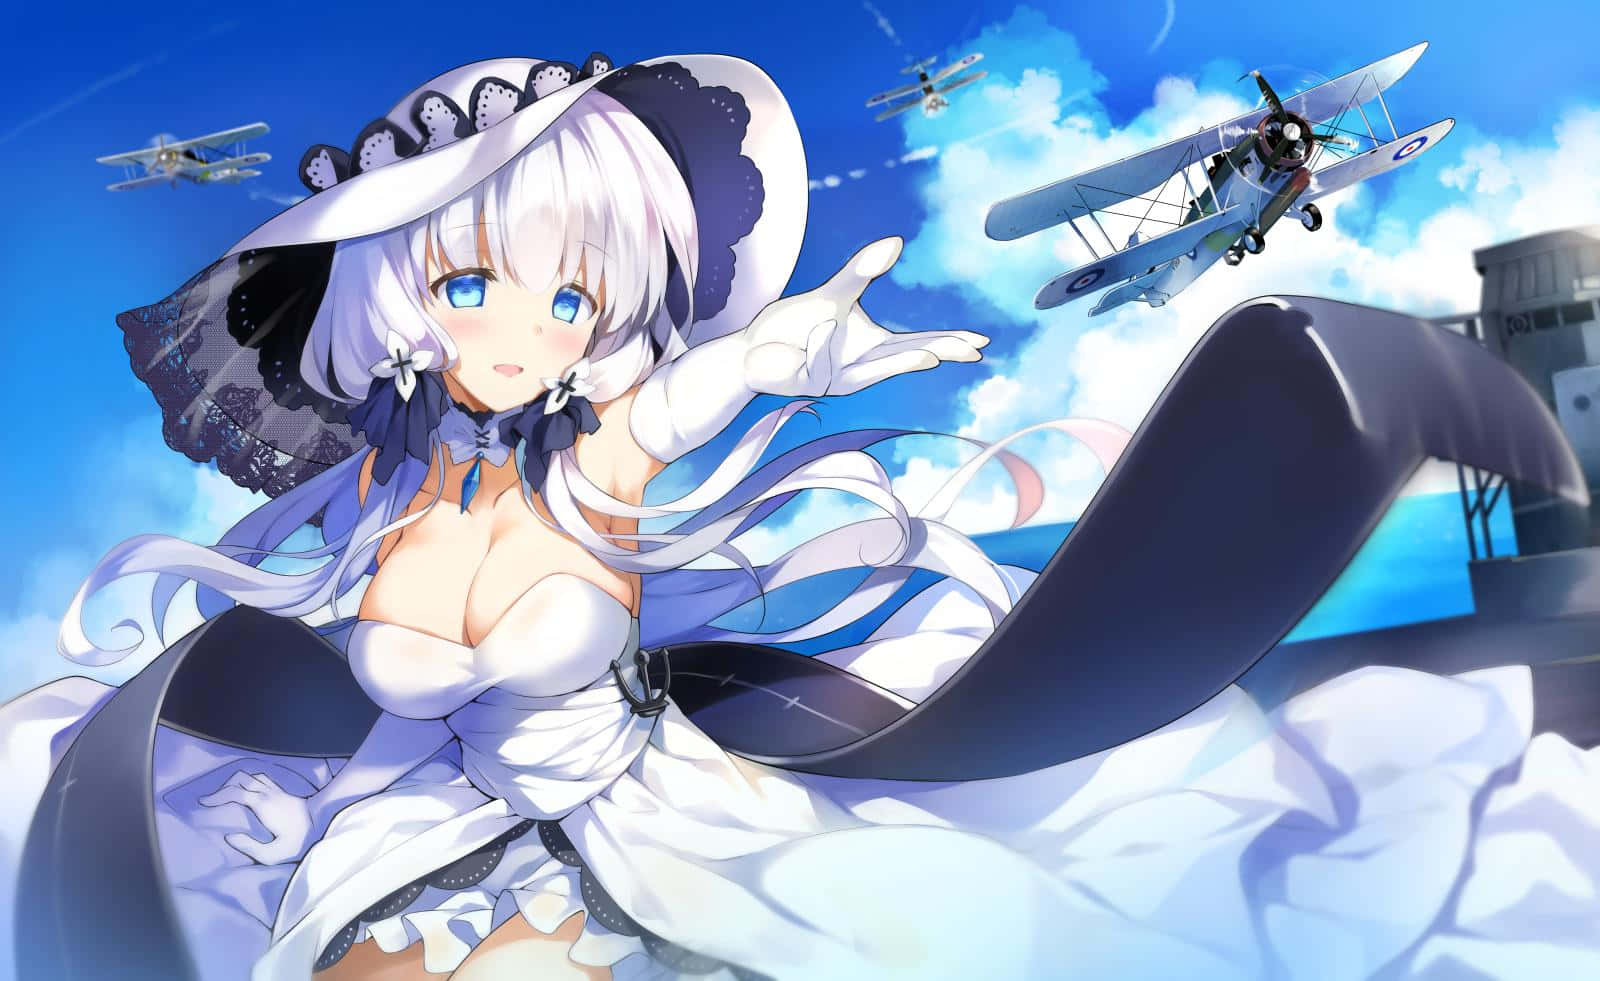 “Cruise the seas safely in Azur Lane.”